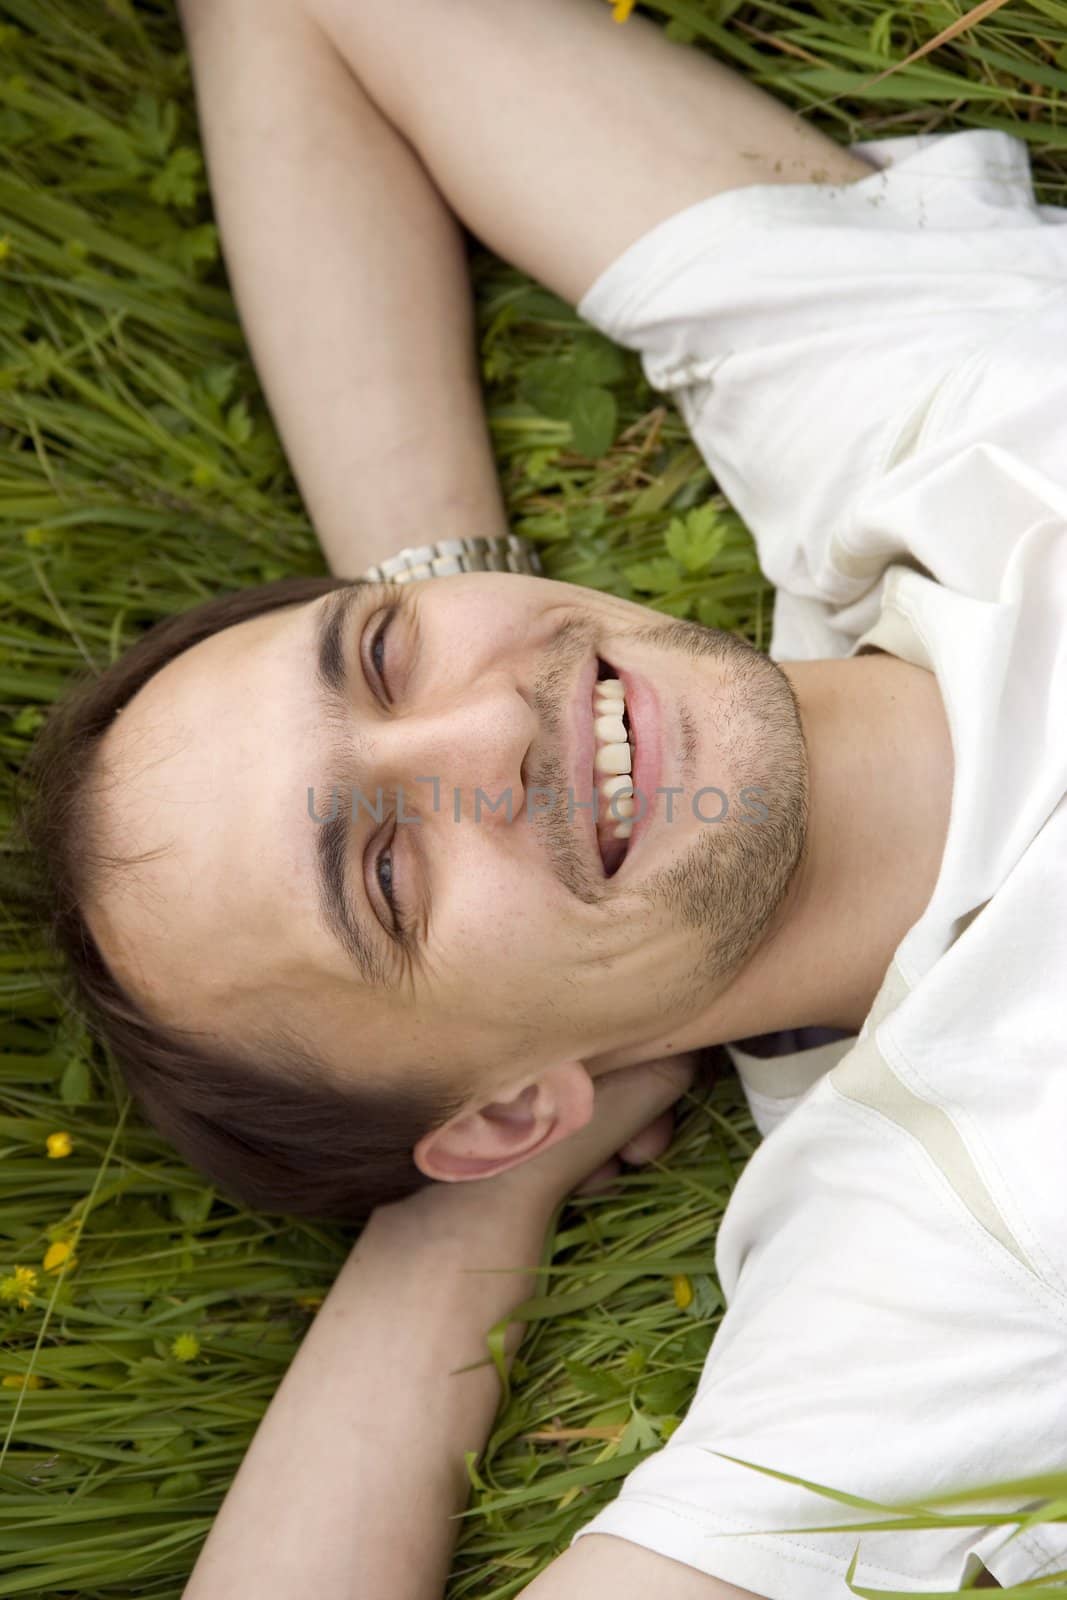 The smiling man has a rest on a grass